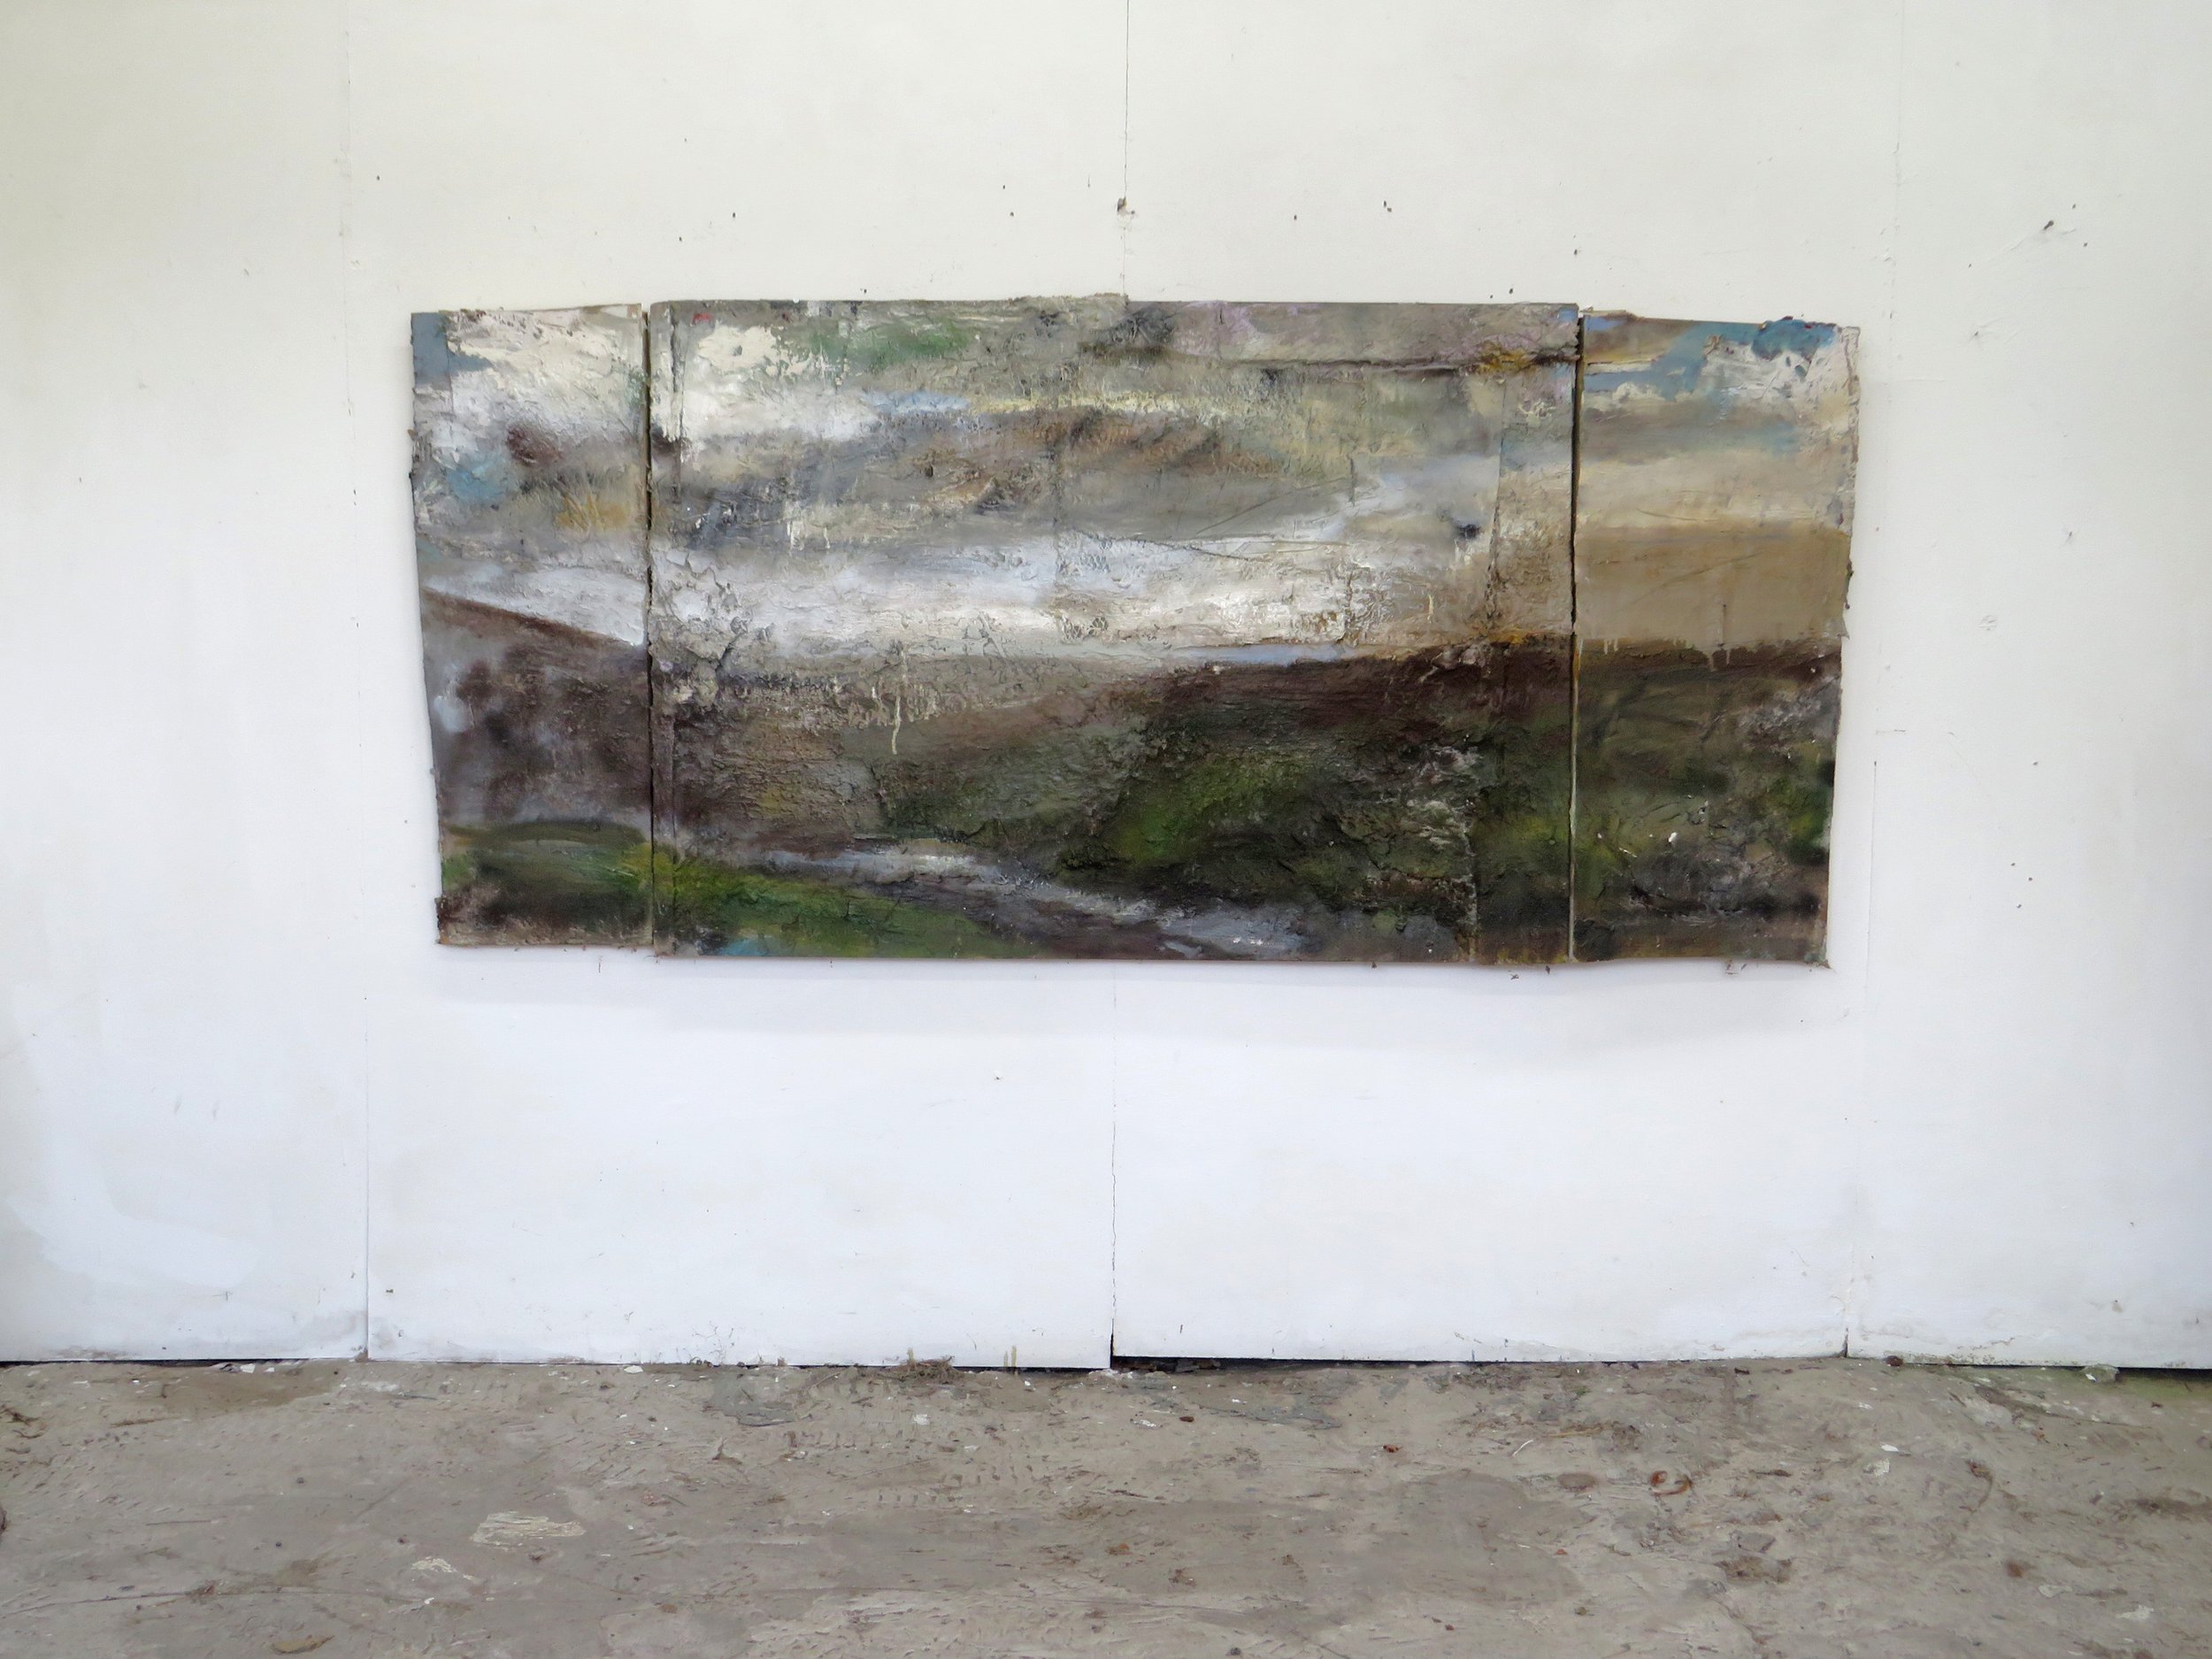 Stream, Valley and Clouds 109 x 230 cms